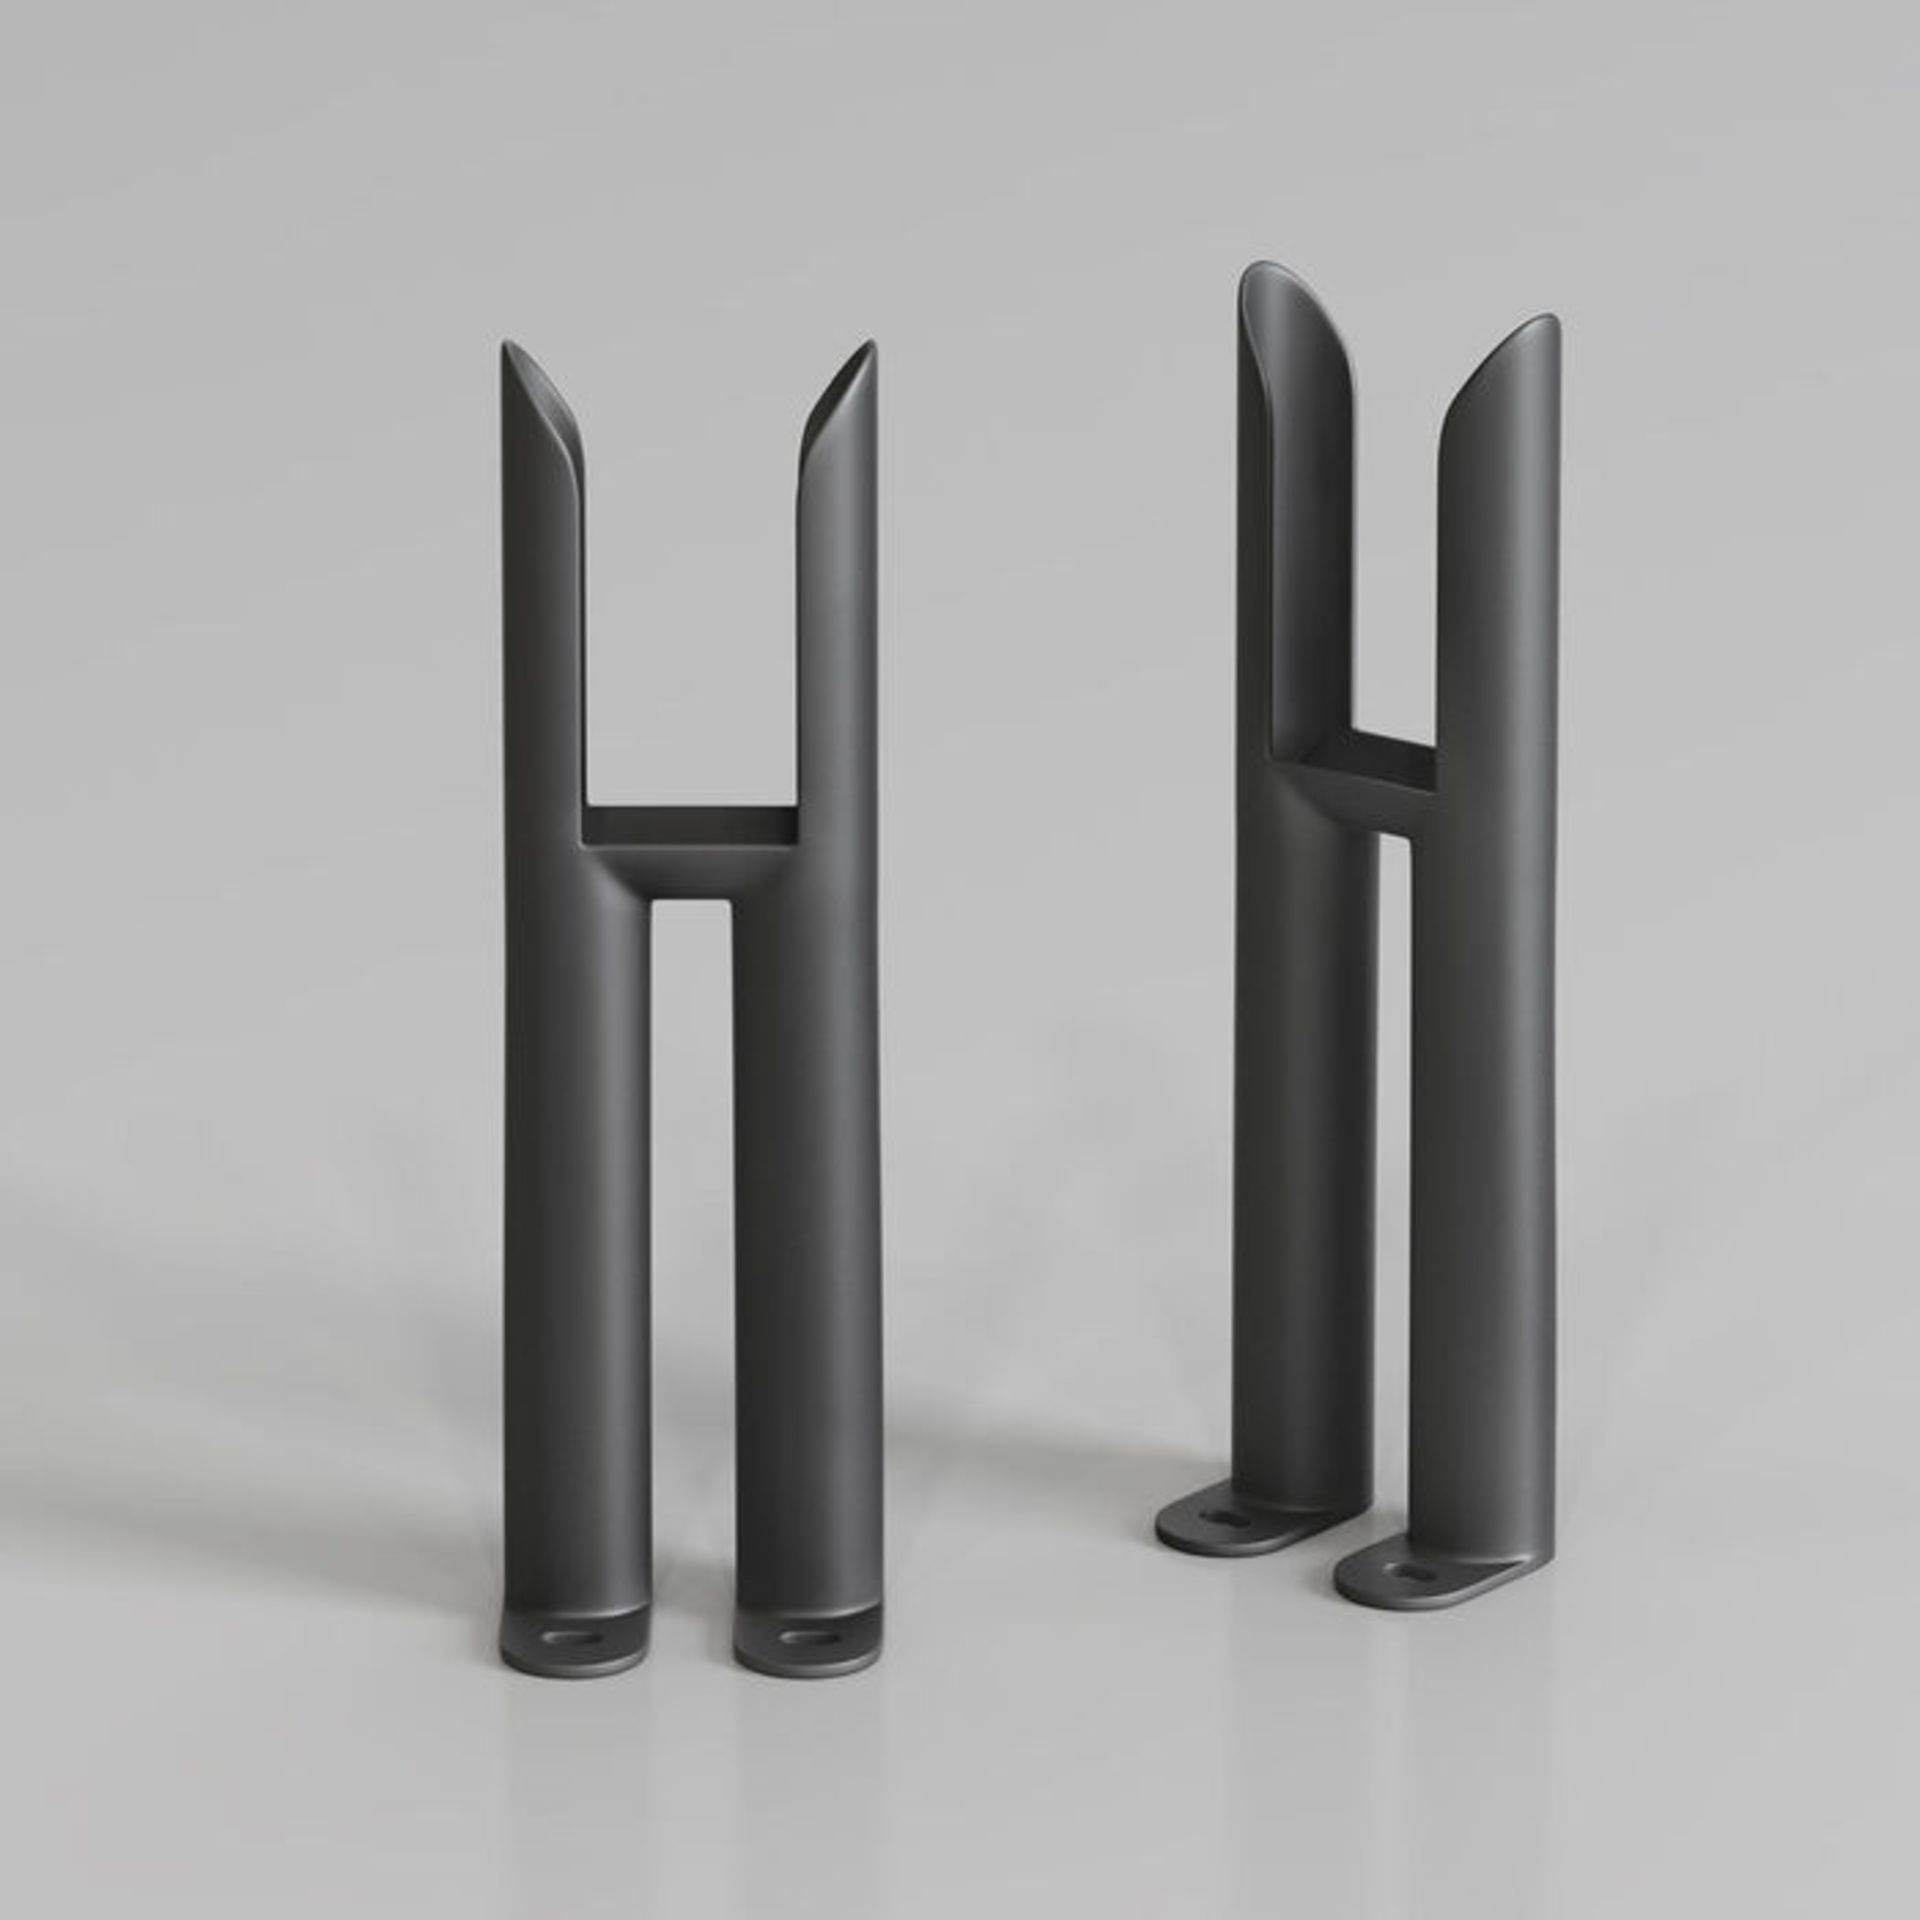 (EE1008) 300x72 Wall Mounting Feet Set for 2 Bar Radiators - Anthracite. Can be used to floor m...